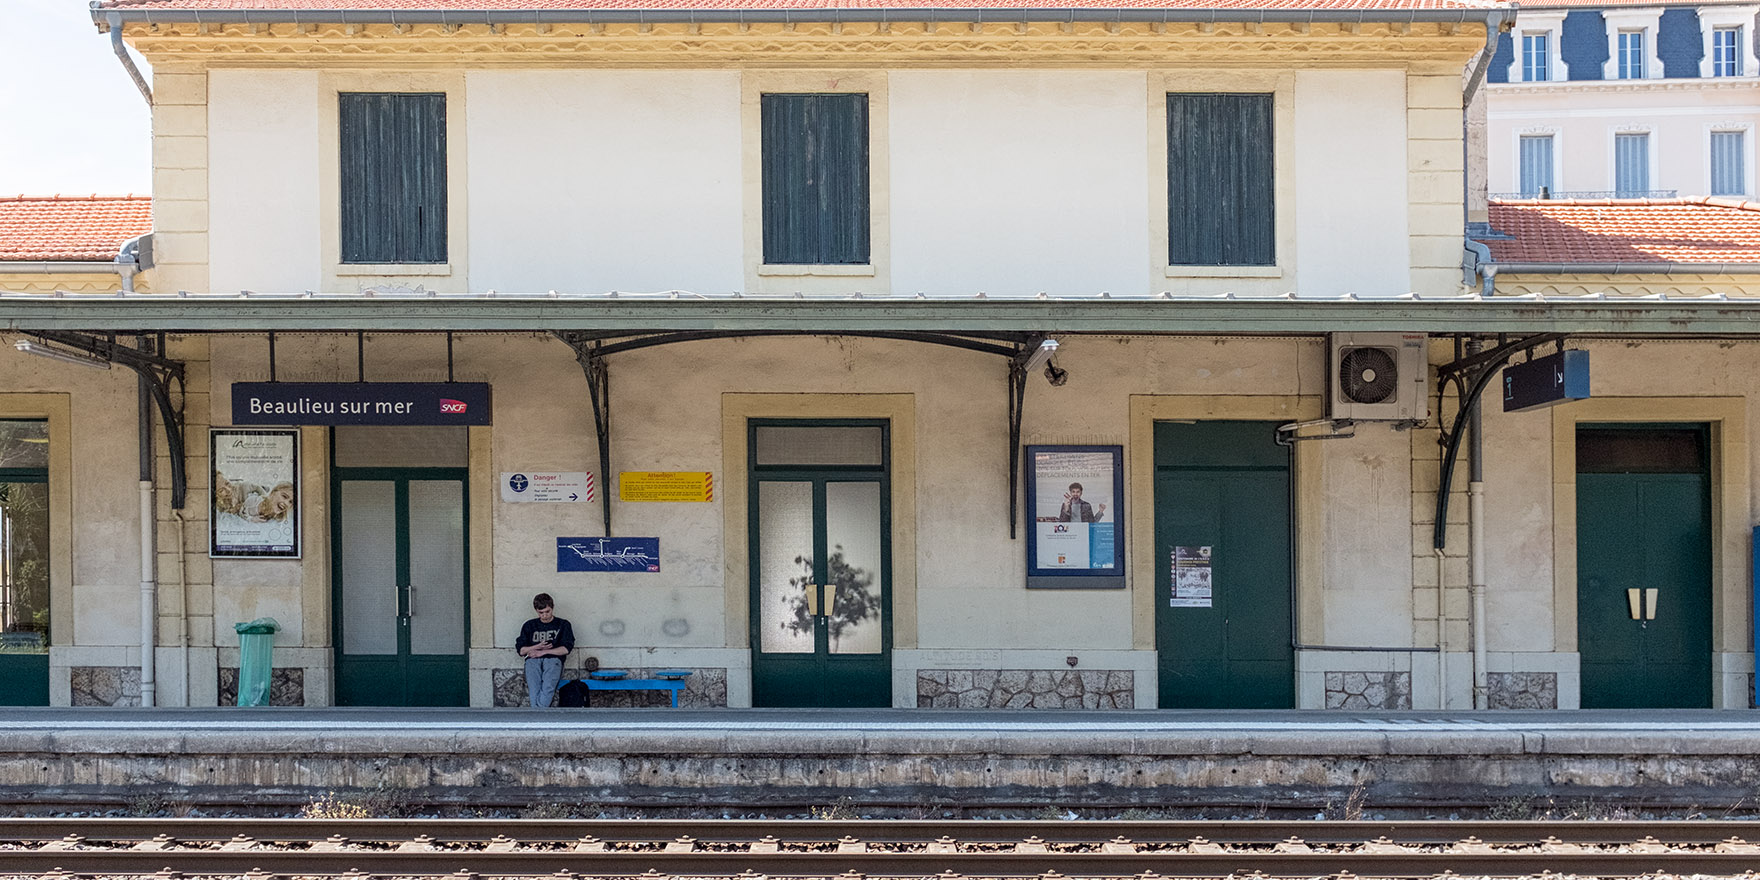 Back at the Beaulieu-sur-Mer station waiting for our train to Cannes